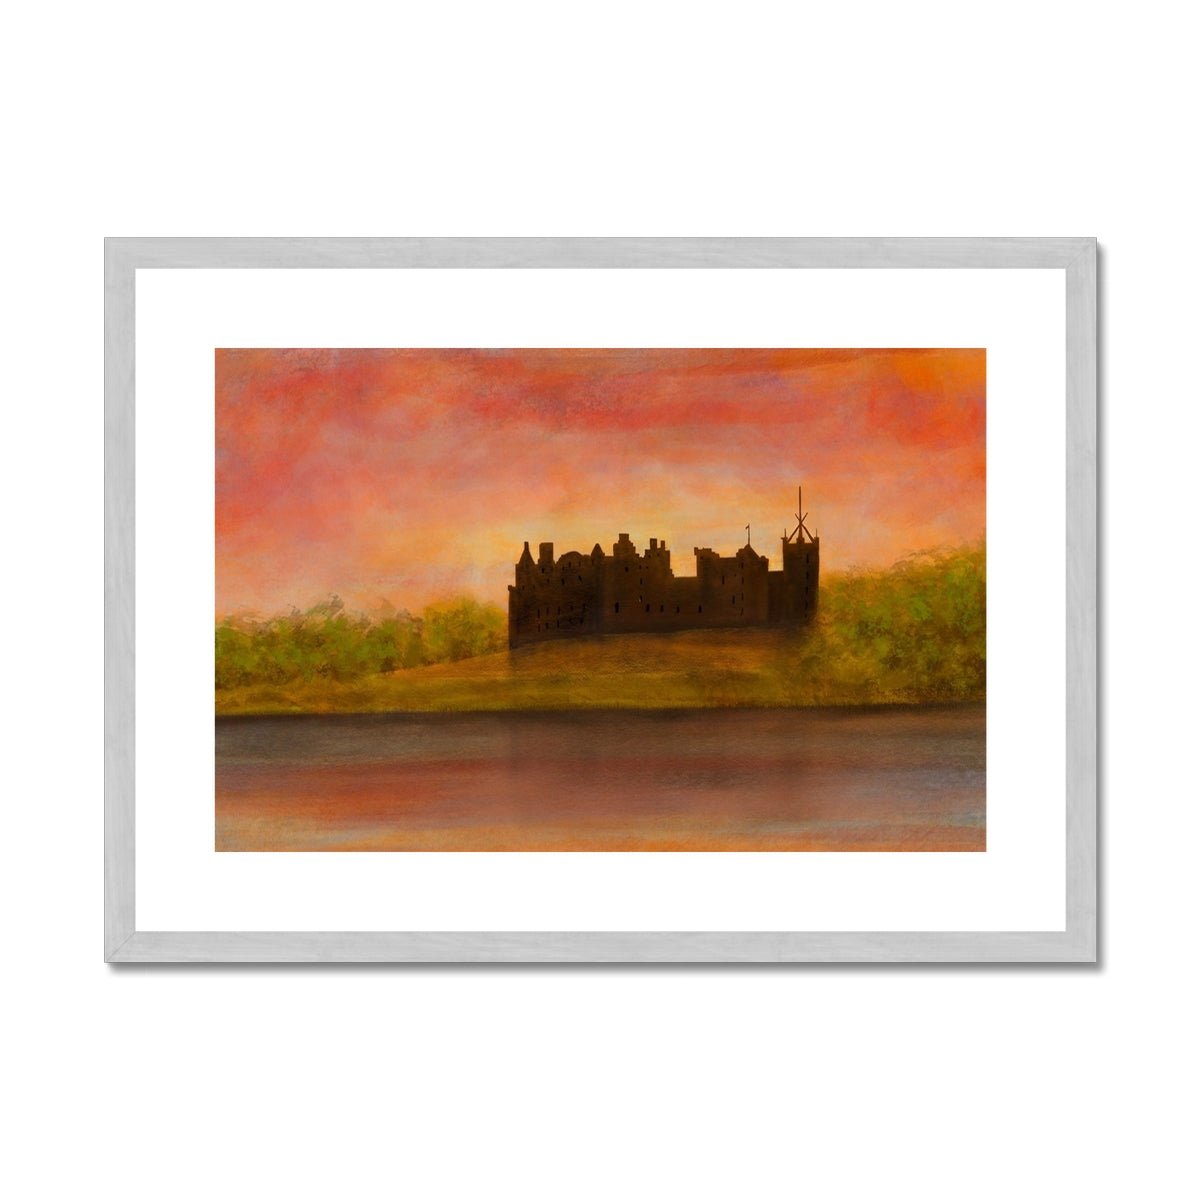 Linlithgow Palace Dusk Painting | Antique Framed & Mounted Prints From Scotland-Antique Framed & Mounted Prints-Historic & Iconic Scotland Art Gallery-A2 Landscape-Silver Frame-Paintings, Prints, Homeware, Art Gifts From Scotland By Scottish Artist Kevin Hunter